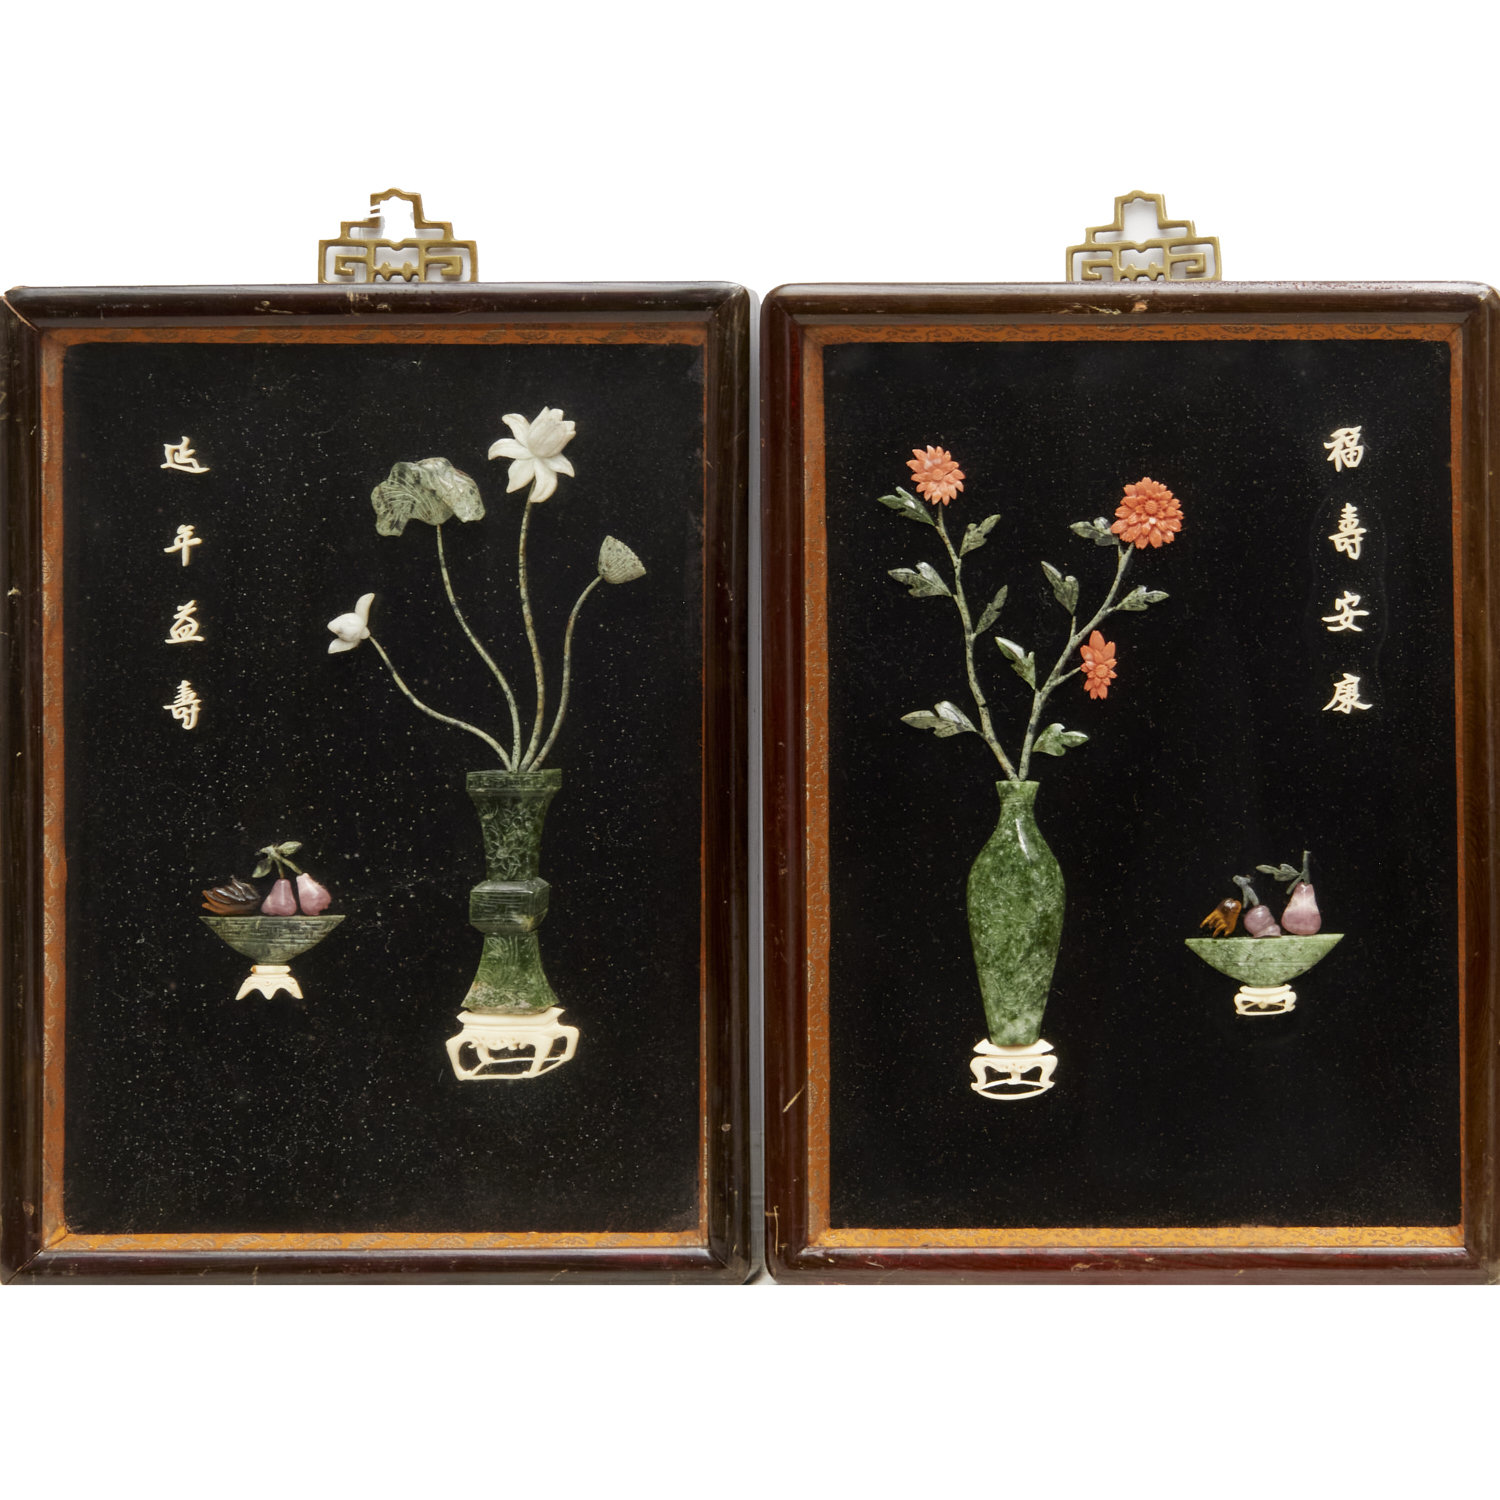 PAIR CHINESE STONE-INLAID LACQUER